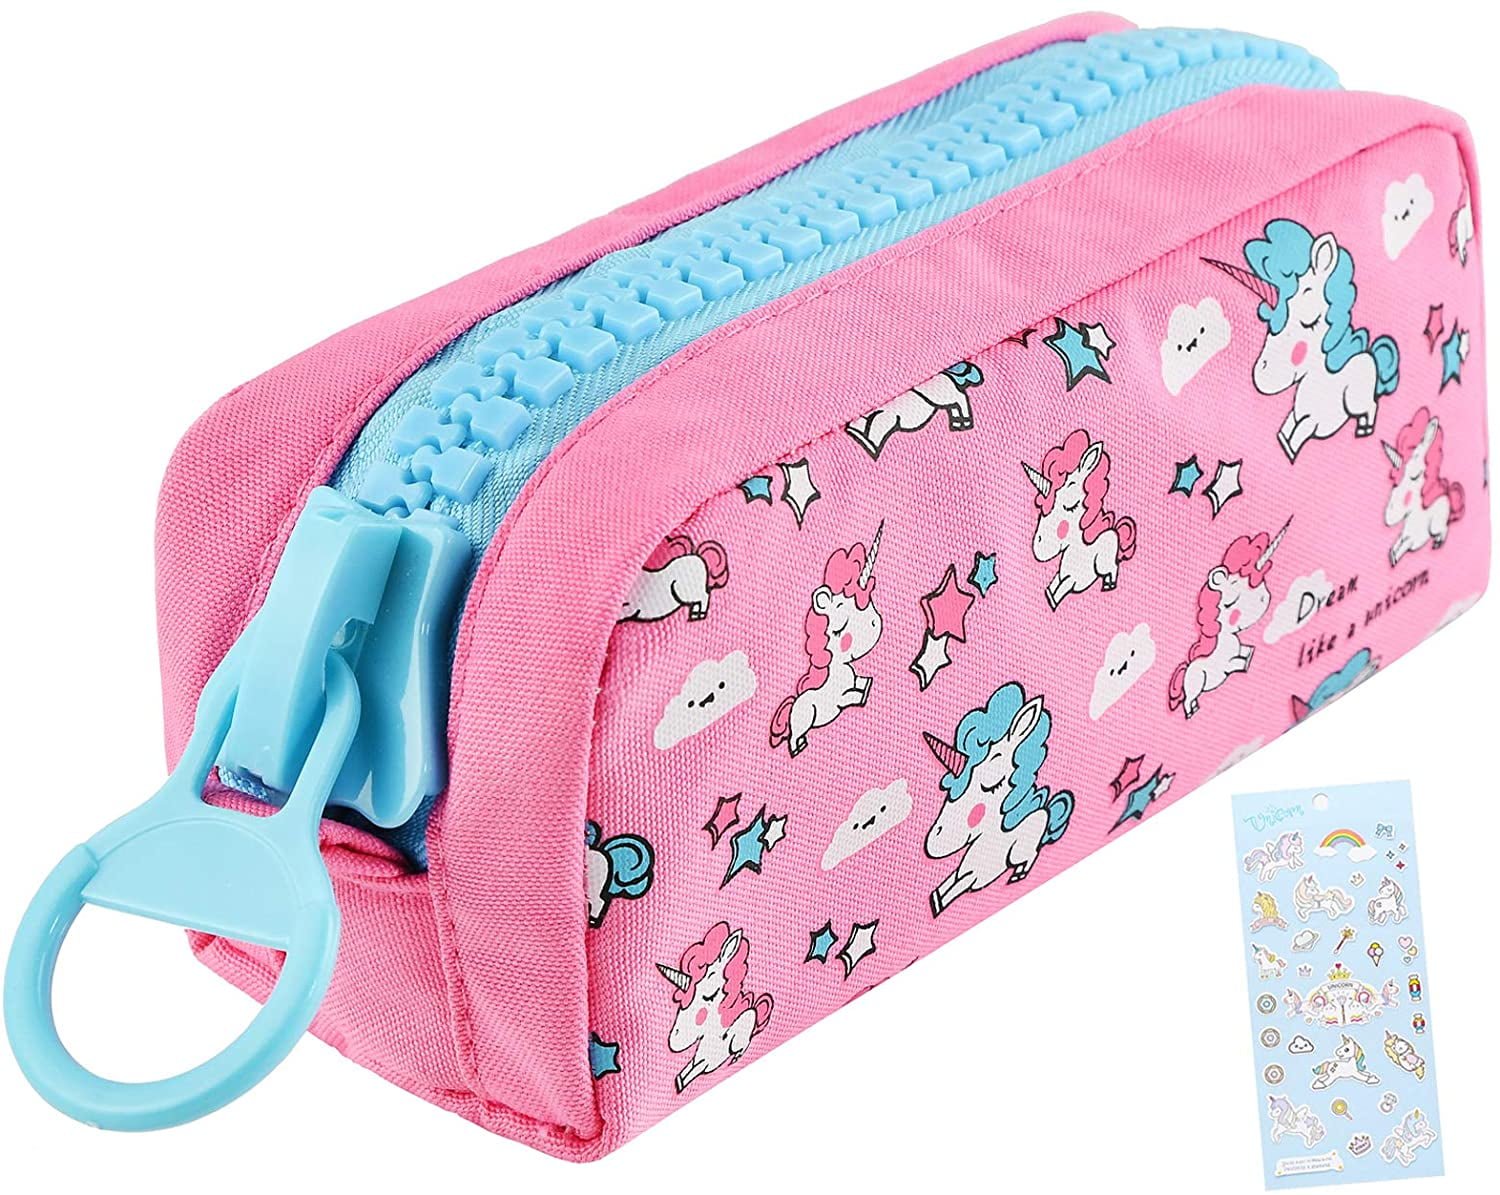 100+ Gorgeous Unicorn Pencil Cases For Girls